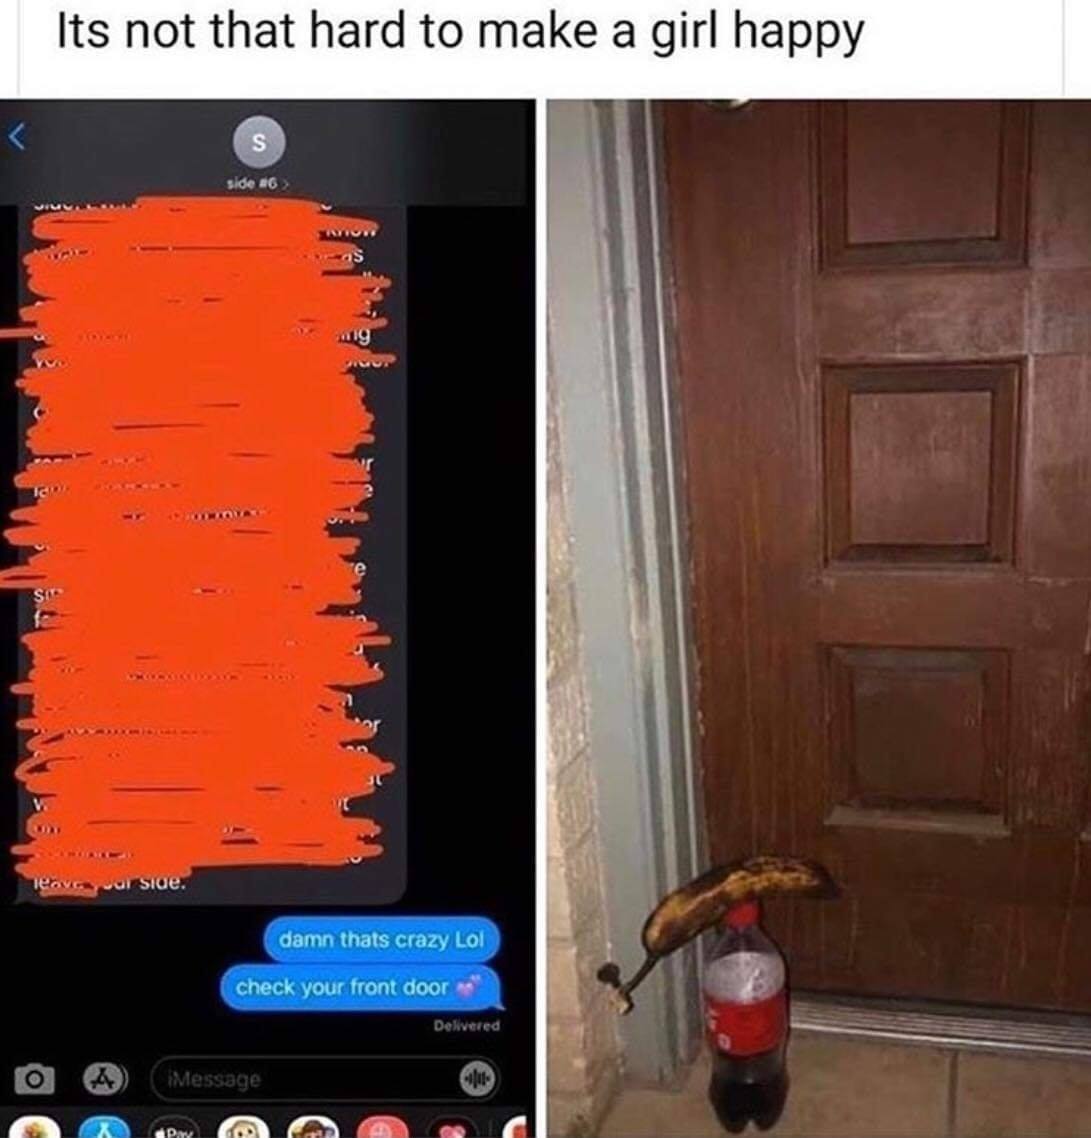 it's not that hard to make a girl happy - Its not that hard to make a girl happy T S side 6 Si Tevral side. damn thats crazy Lol check your front door Delivered Message